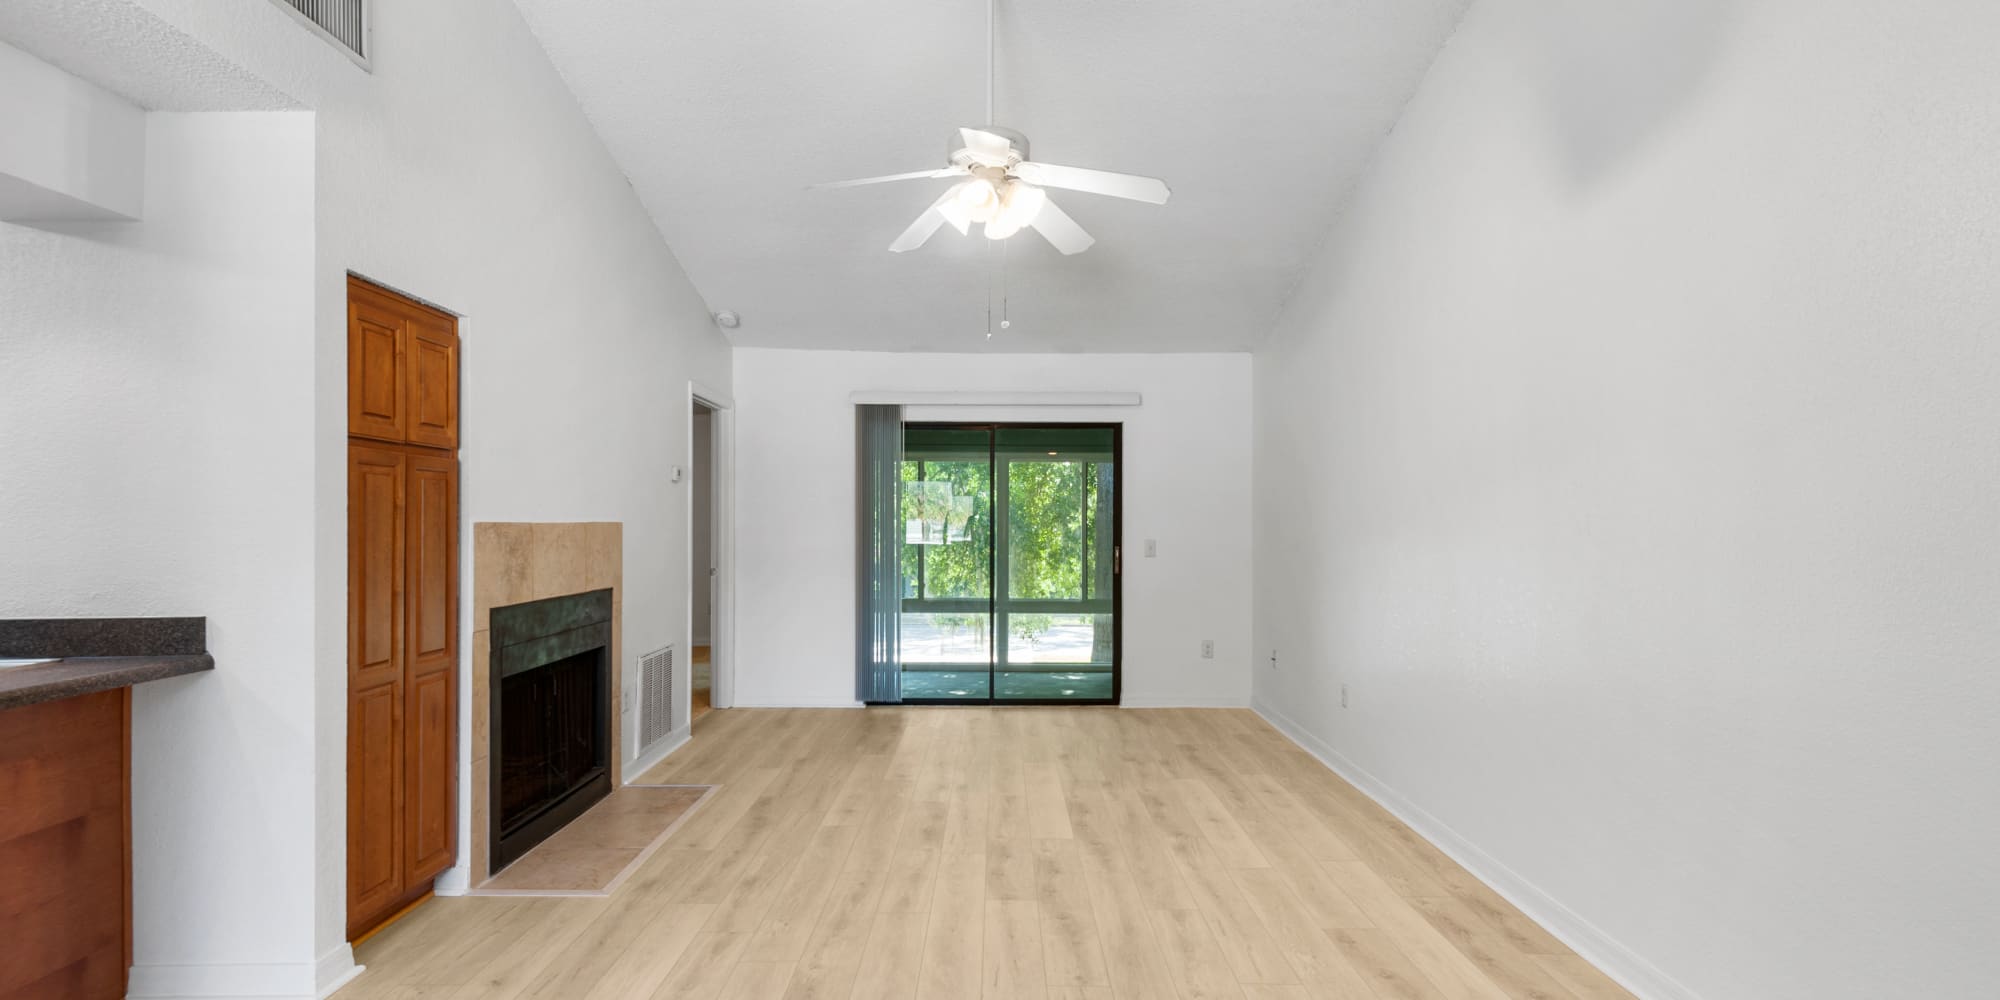 Fireplace and ceiling fan at Stone Creek at Wekiva in Altamonte Springs, Florida